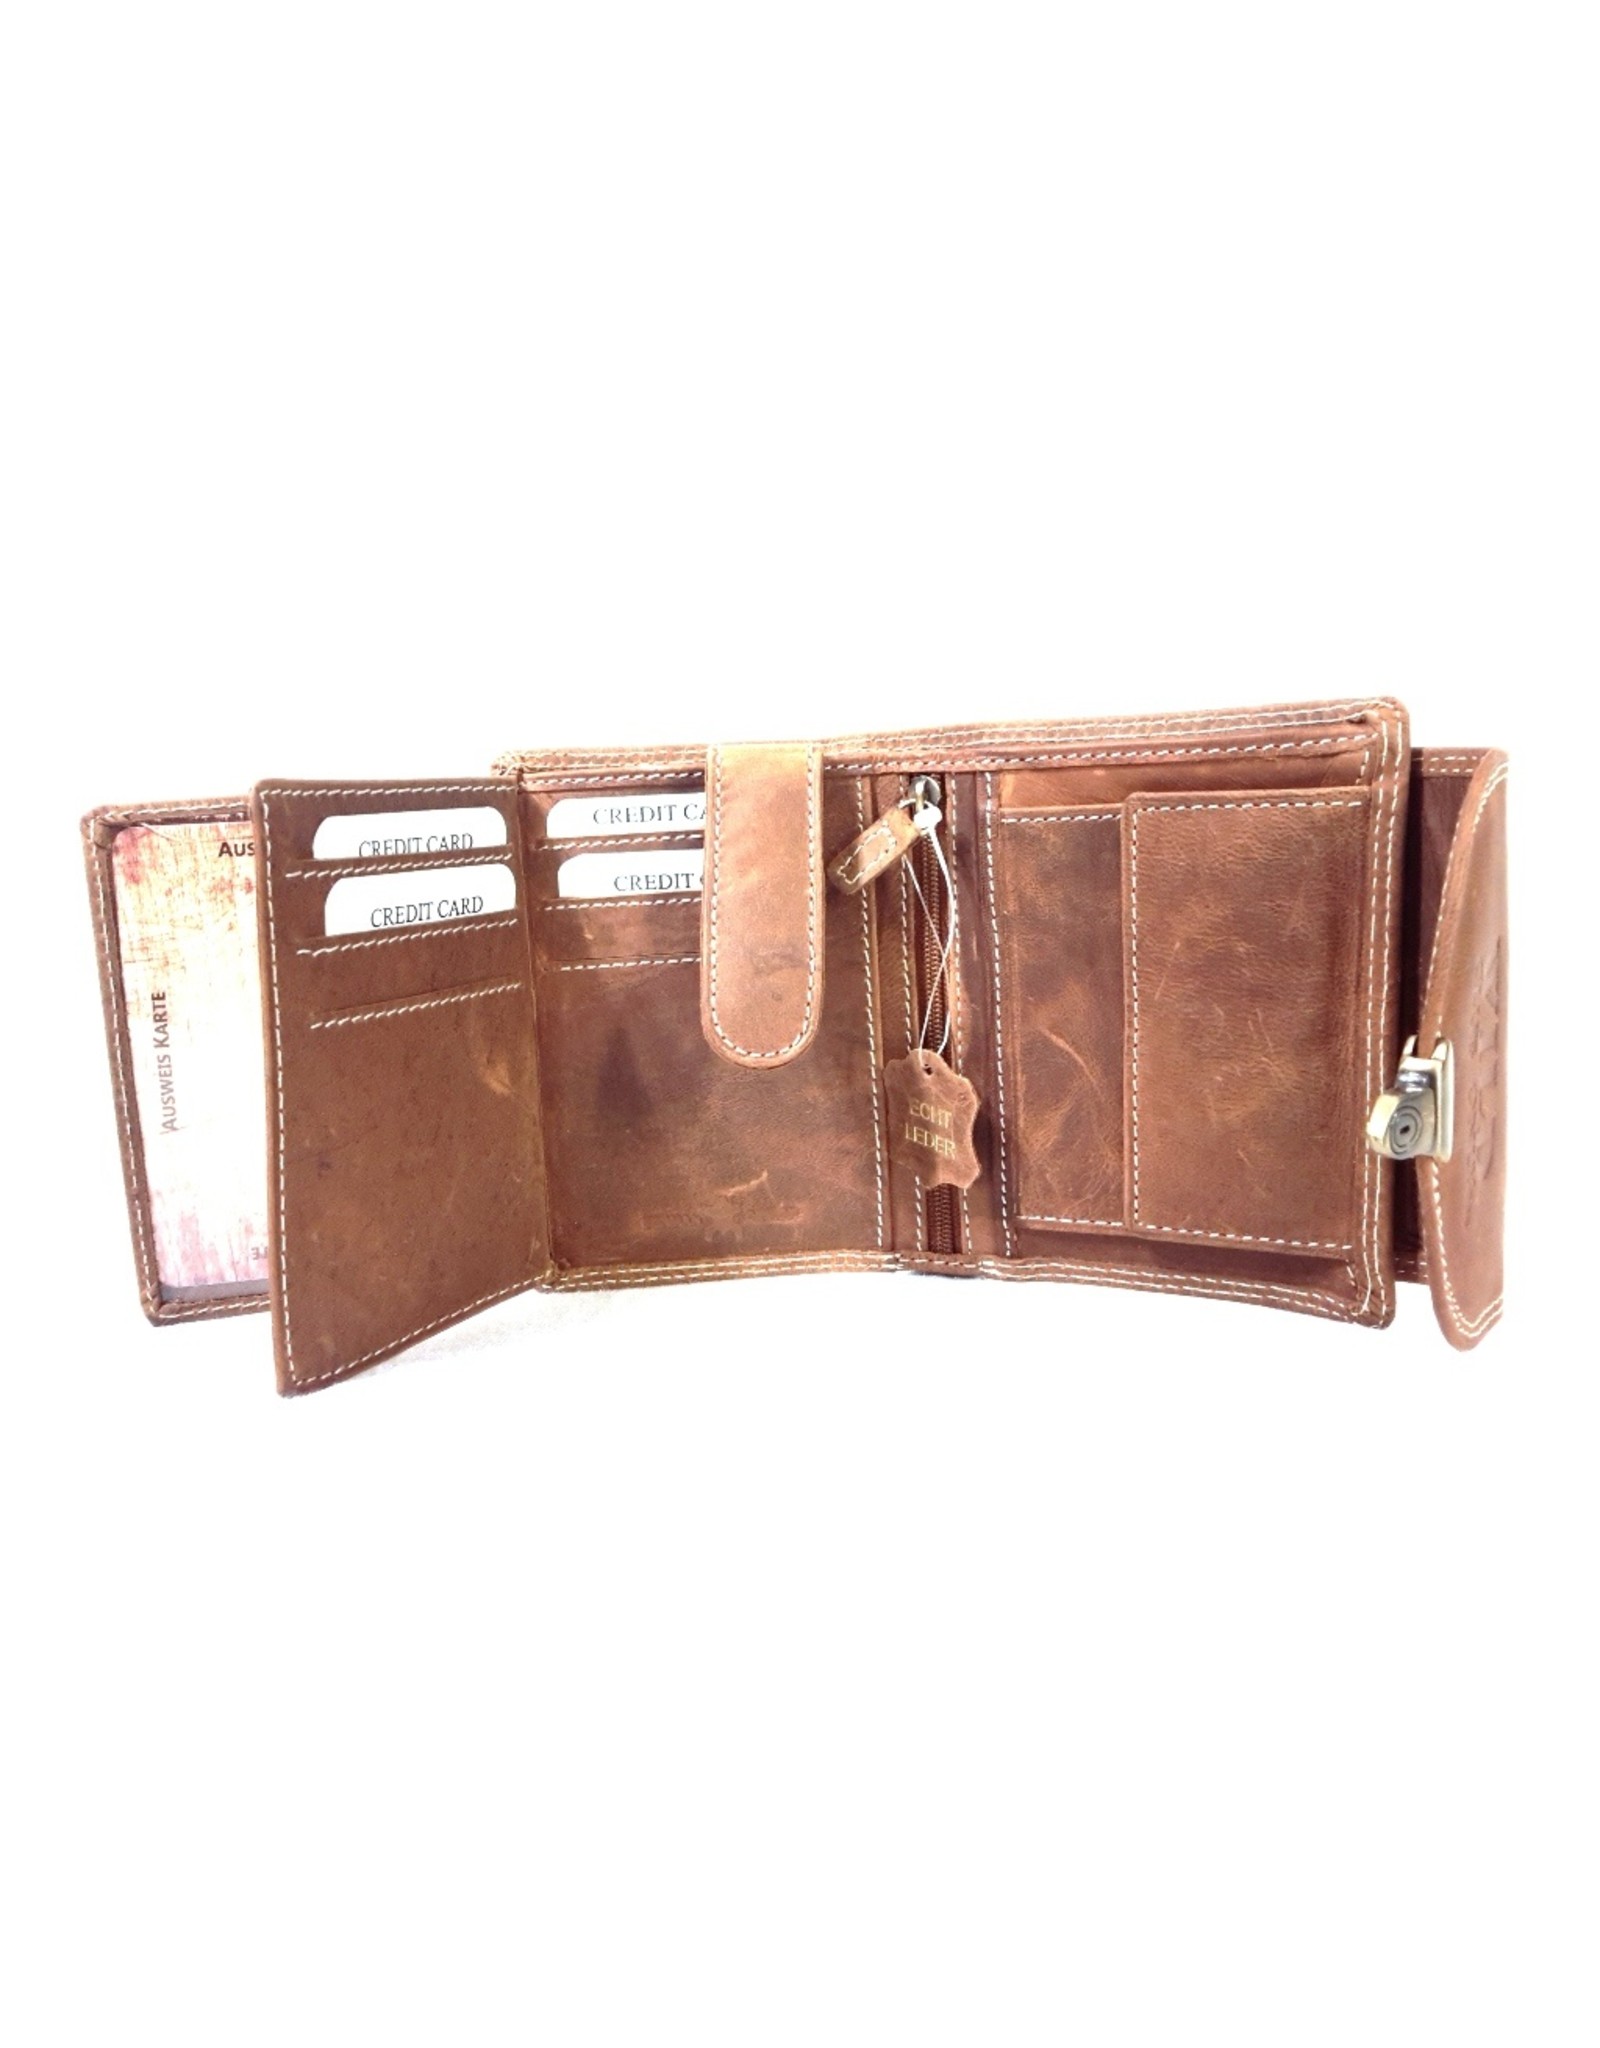 Wild Club Only Leather Wallets -   Leather wallet with slide closure semi-circular cover